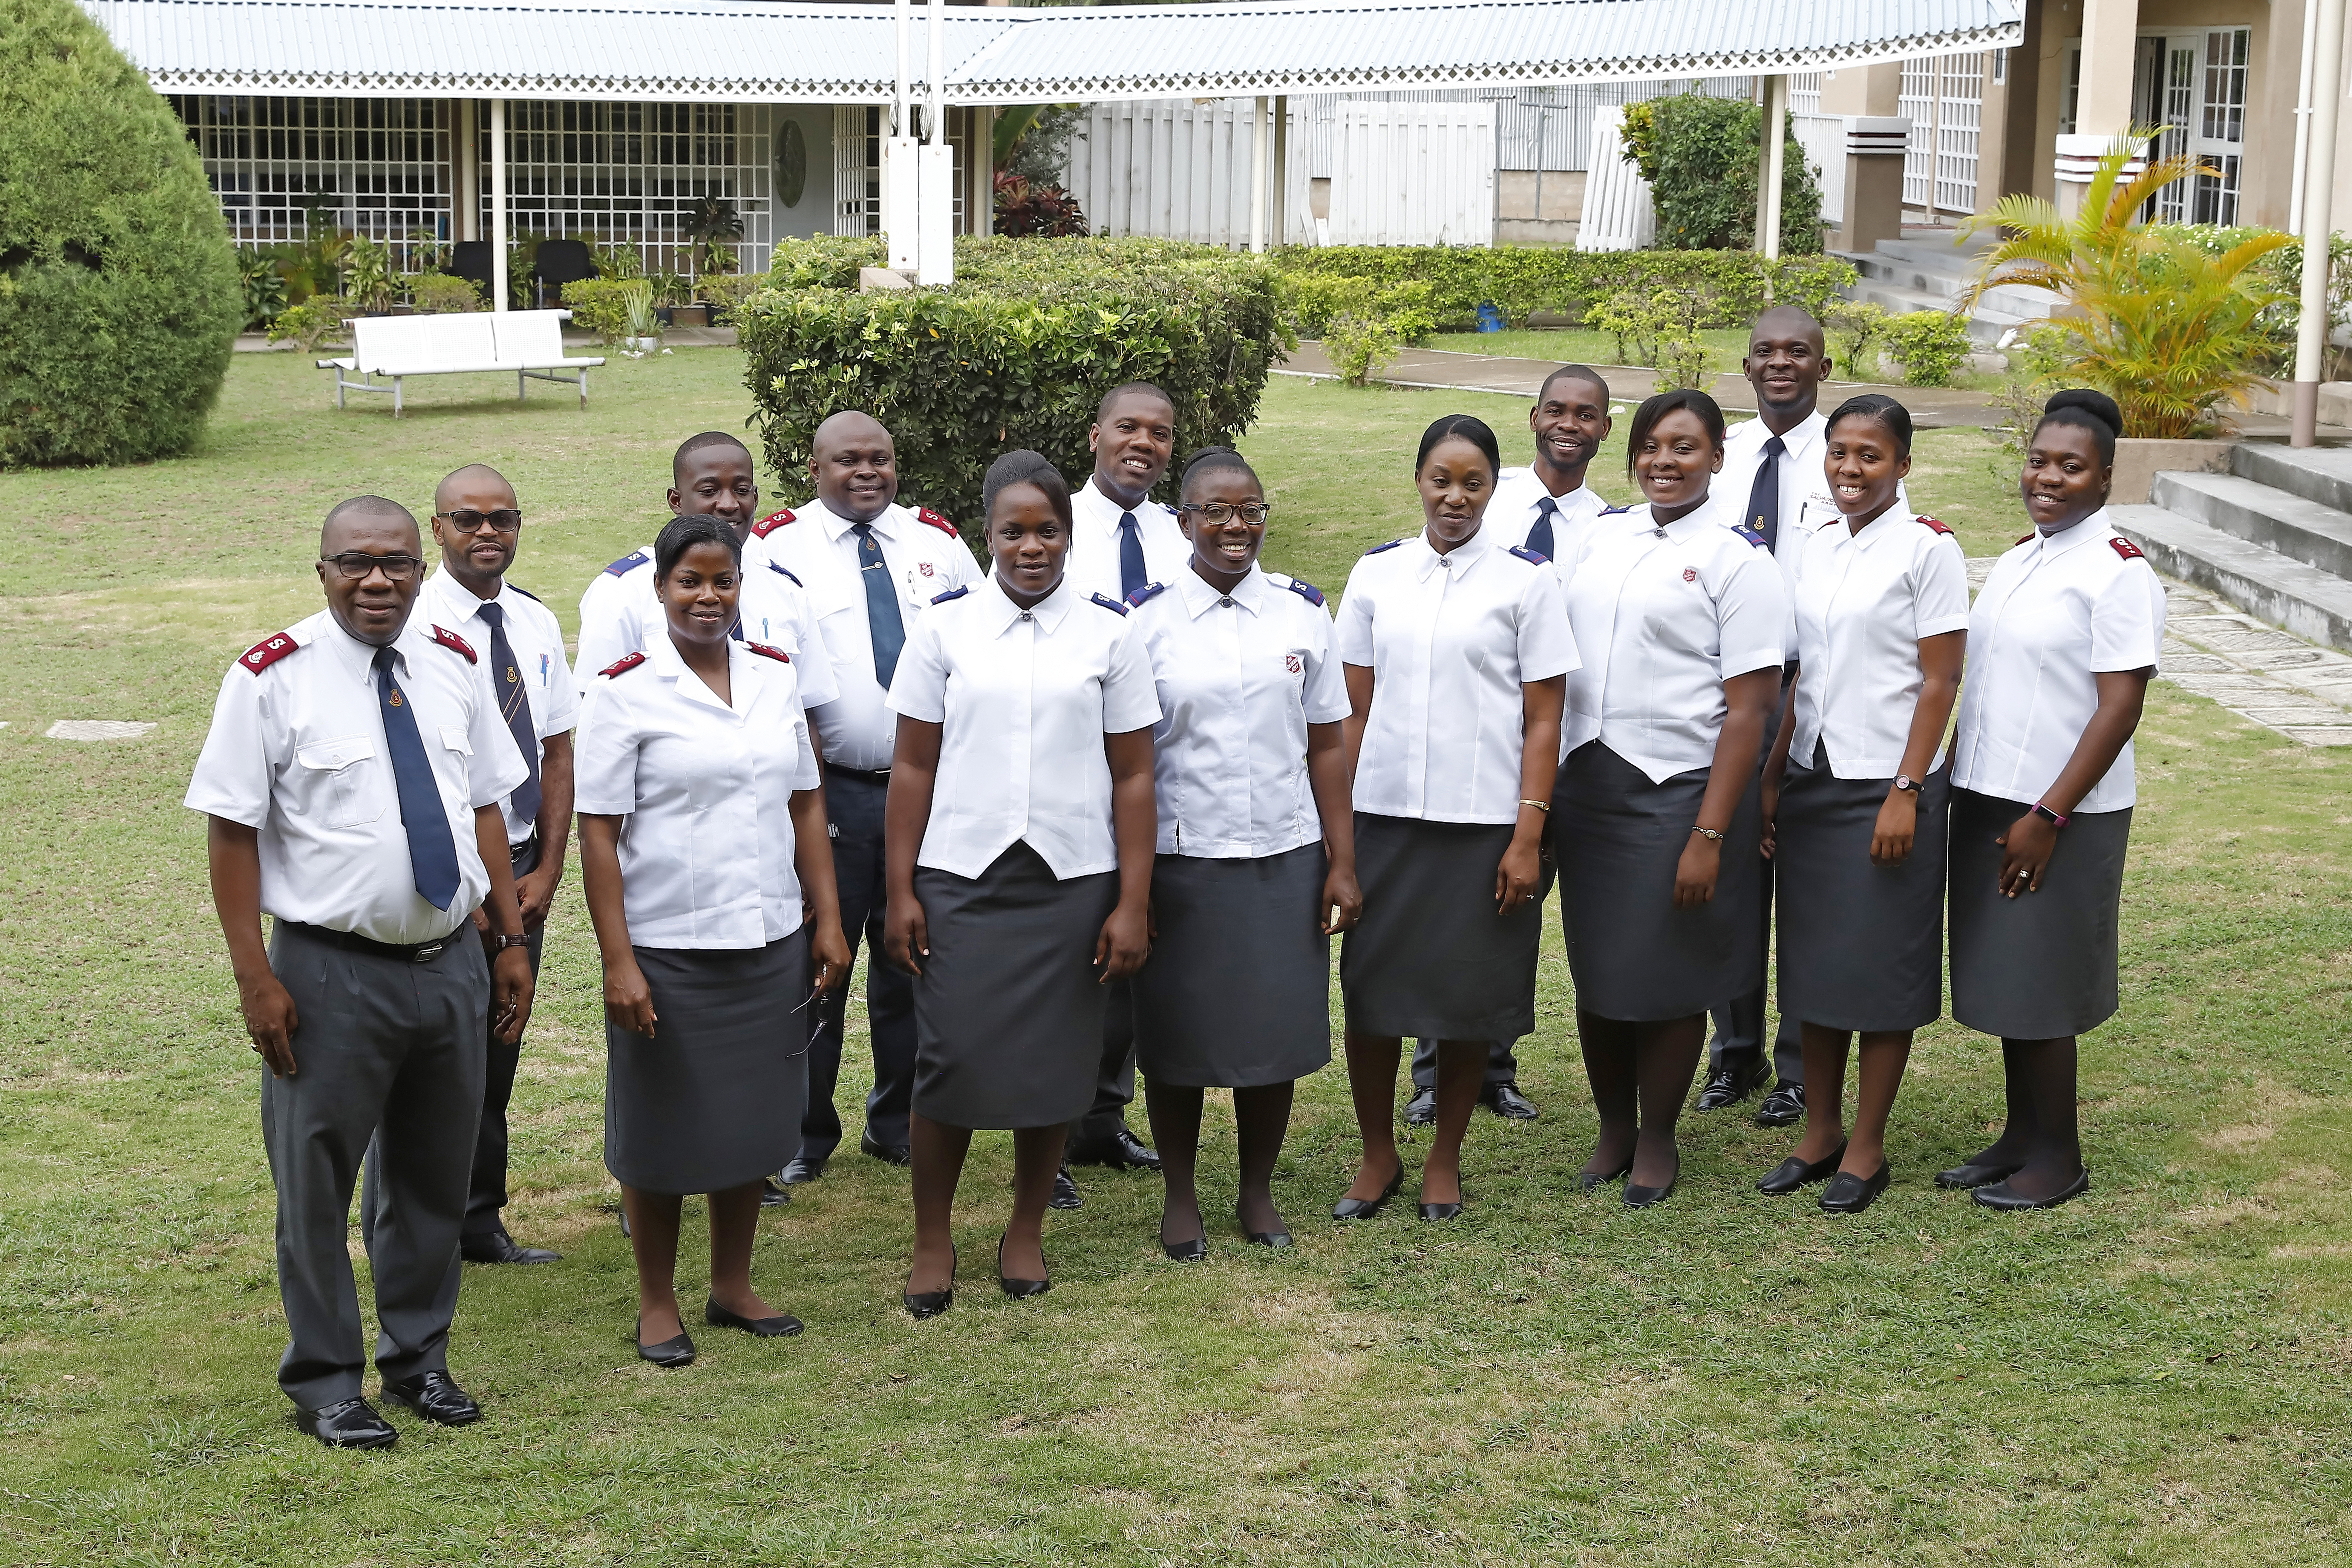 Cadets at Officers Training College in Jamaica standing alongside each other smiling